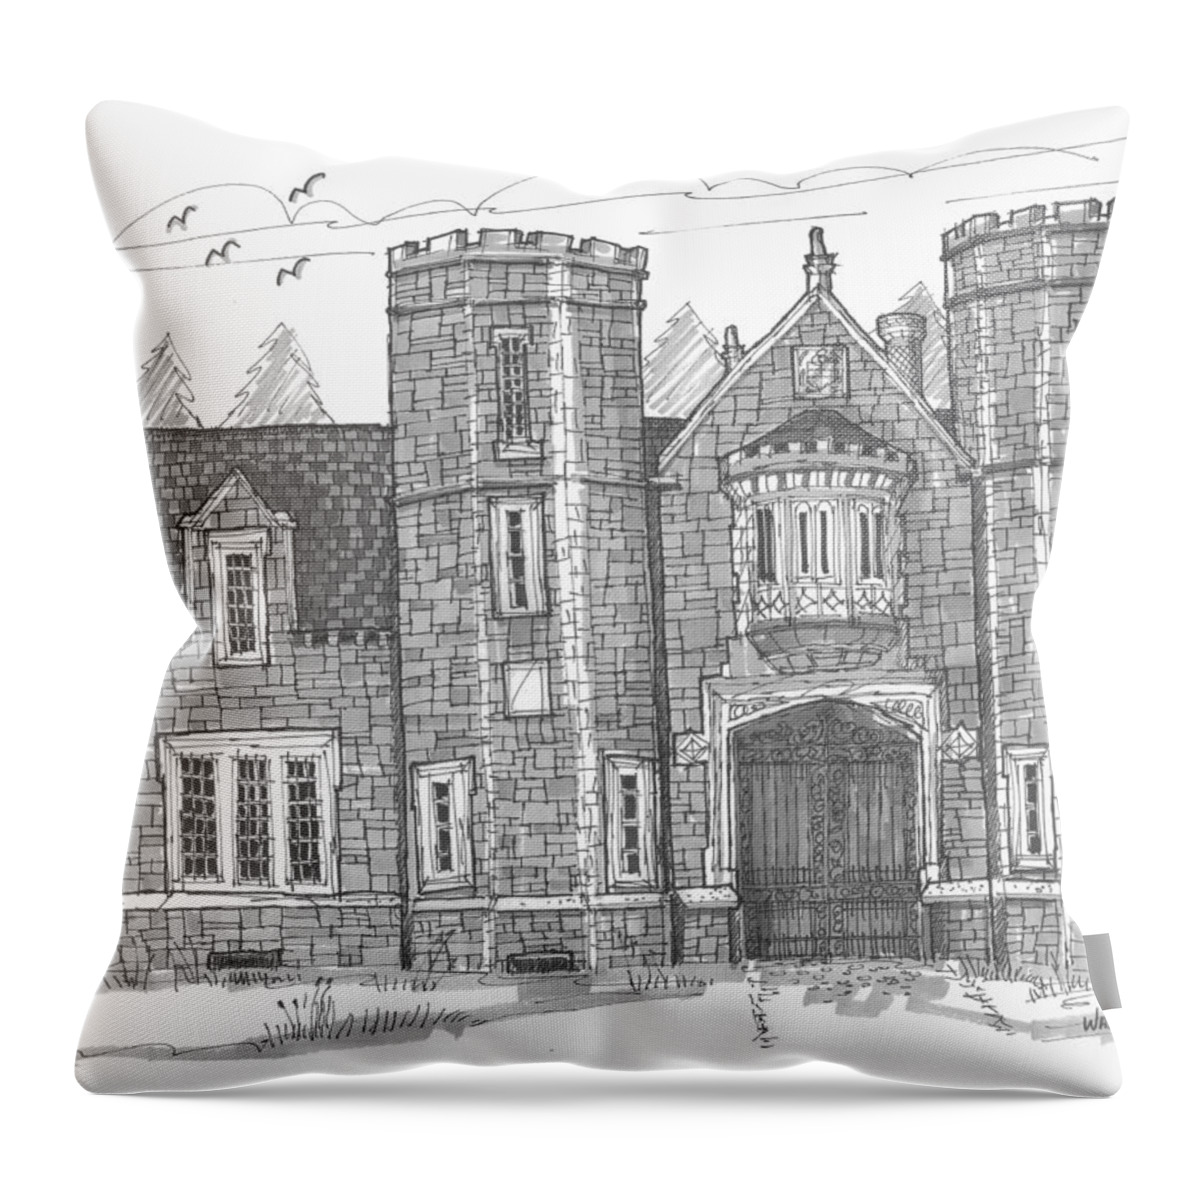 Bard College Throw Pillow featuring the drawing Ward Manor Bard College by Richard Wambach